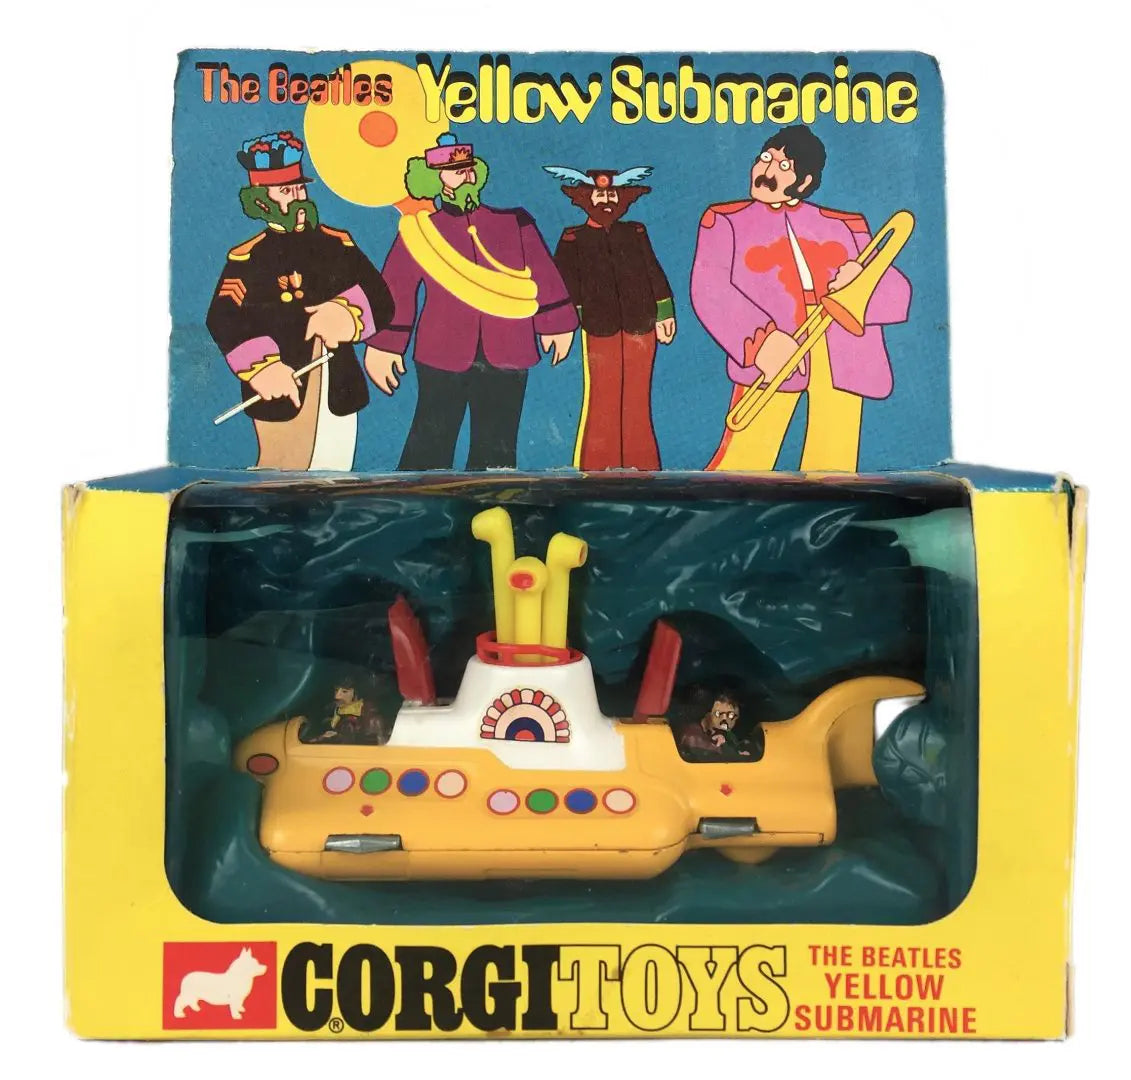 What Makes A Vintage Toy So Collectable?